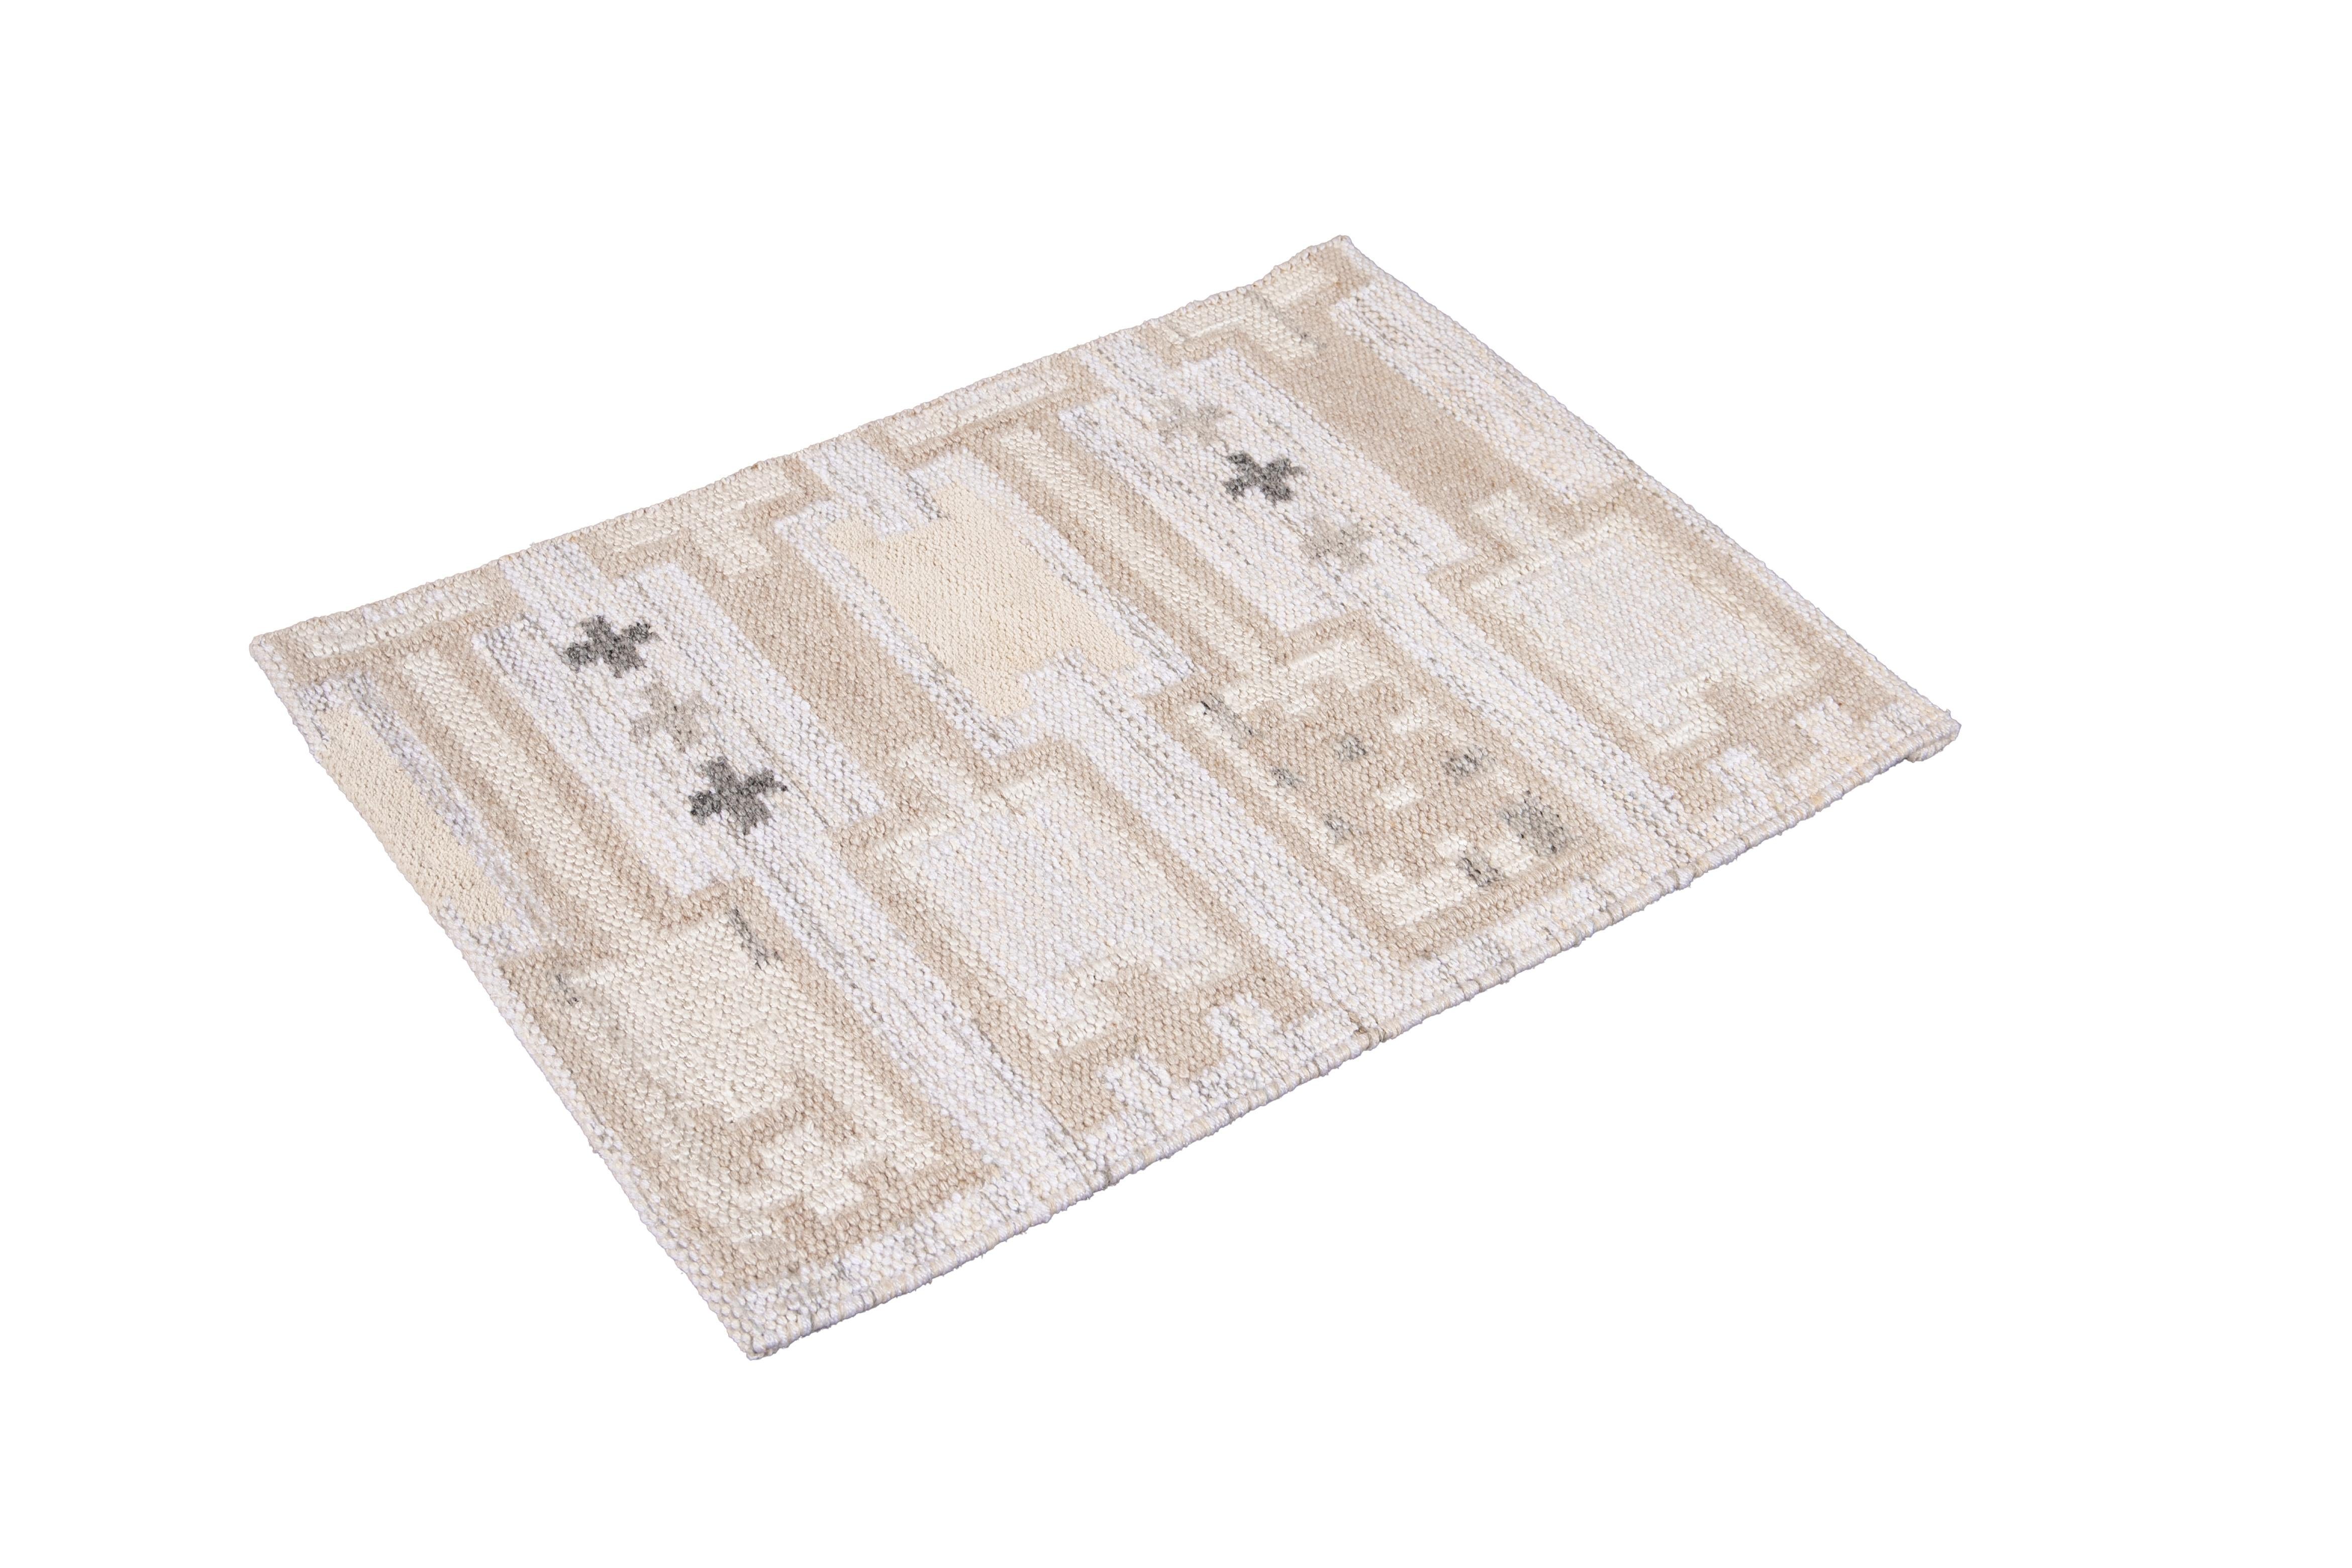 Wool Scandinavian style Kilim custom rug. Custom sizes and colors made-to-order.

Material: Wool 
Lead time: Approx. 15-20 weeks available
Colors: Custom colors and styles available Made in India.
The price listed is for an 8' x 10' rug.